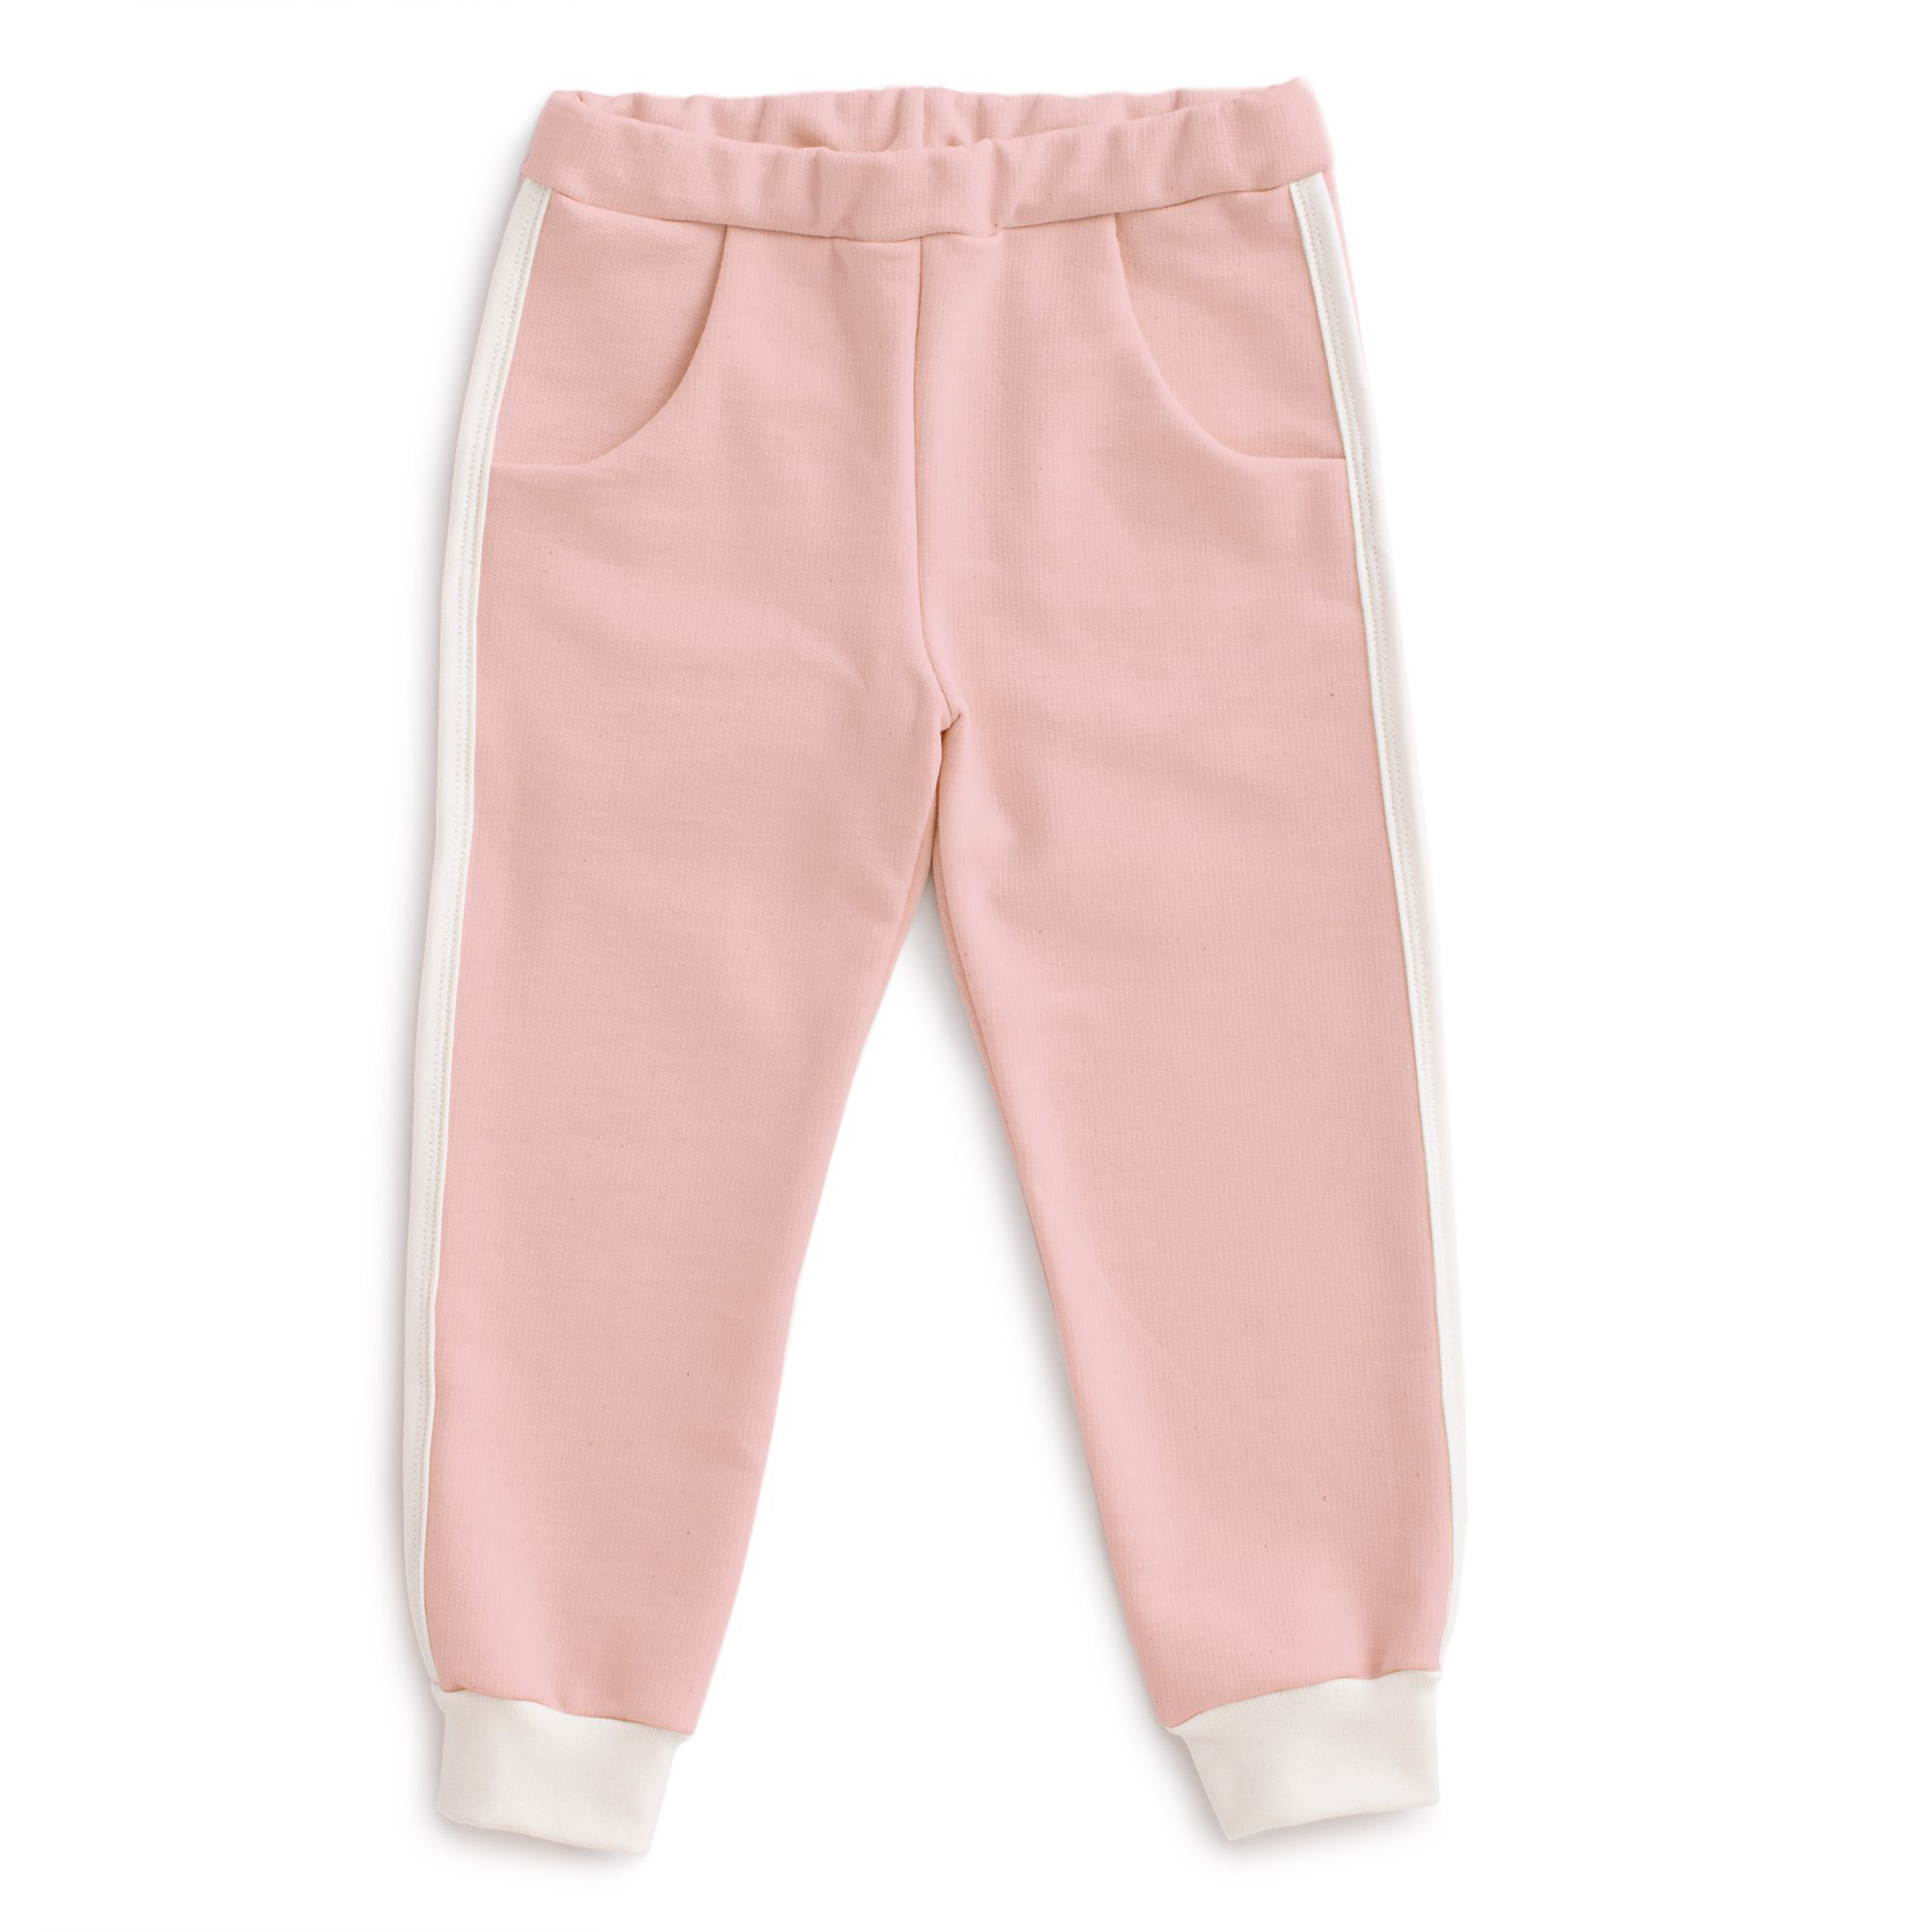 Winter Water Factory Winter Water Factory Pink Track Pants